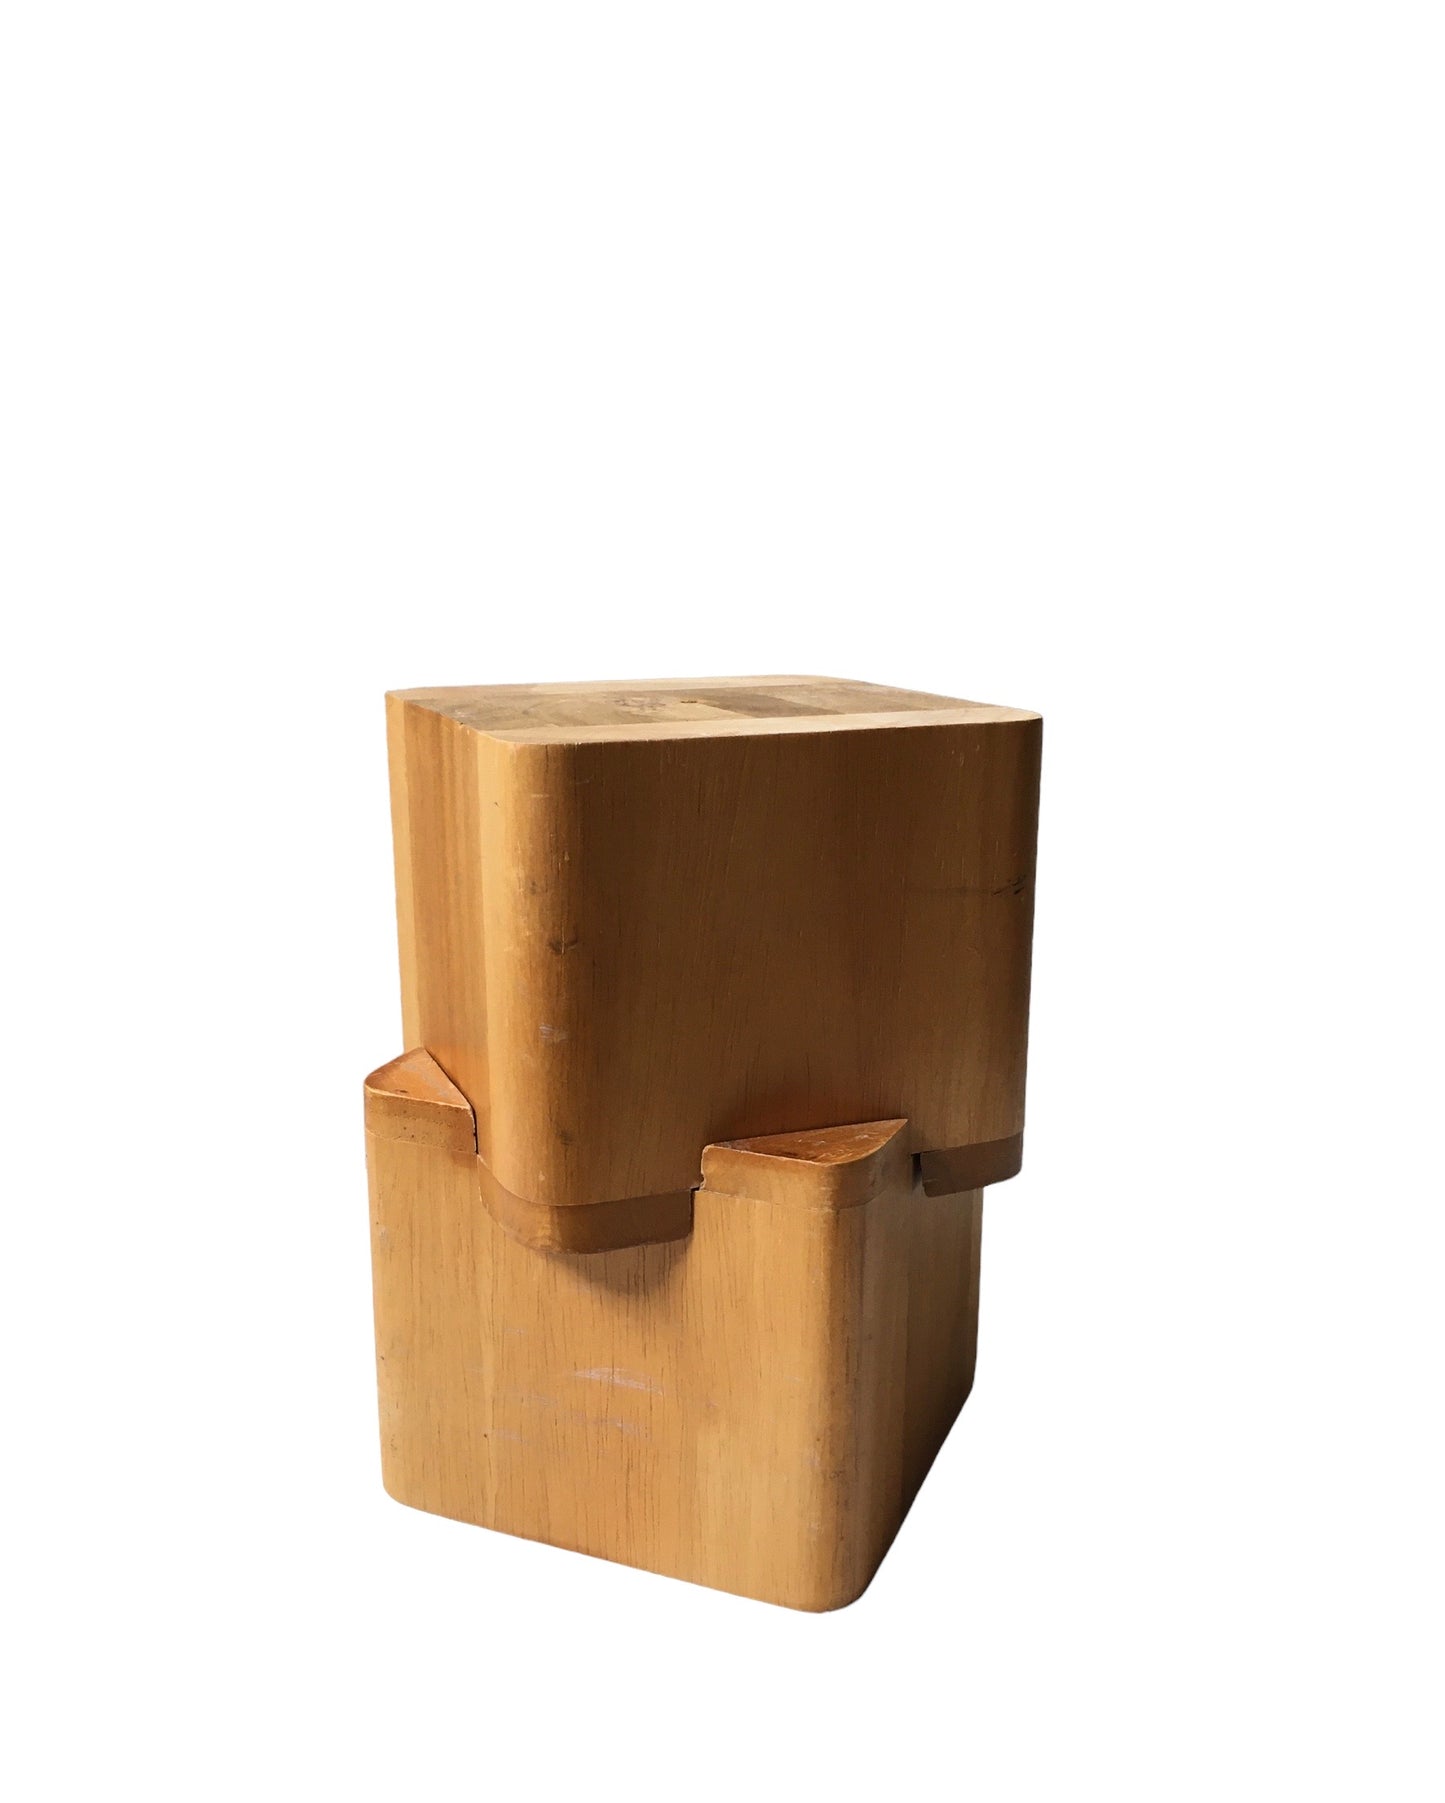 The Block candle holder